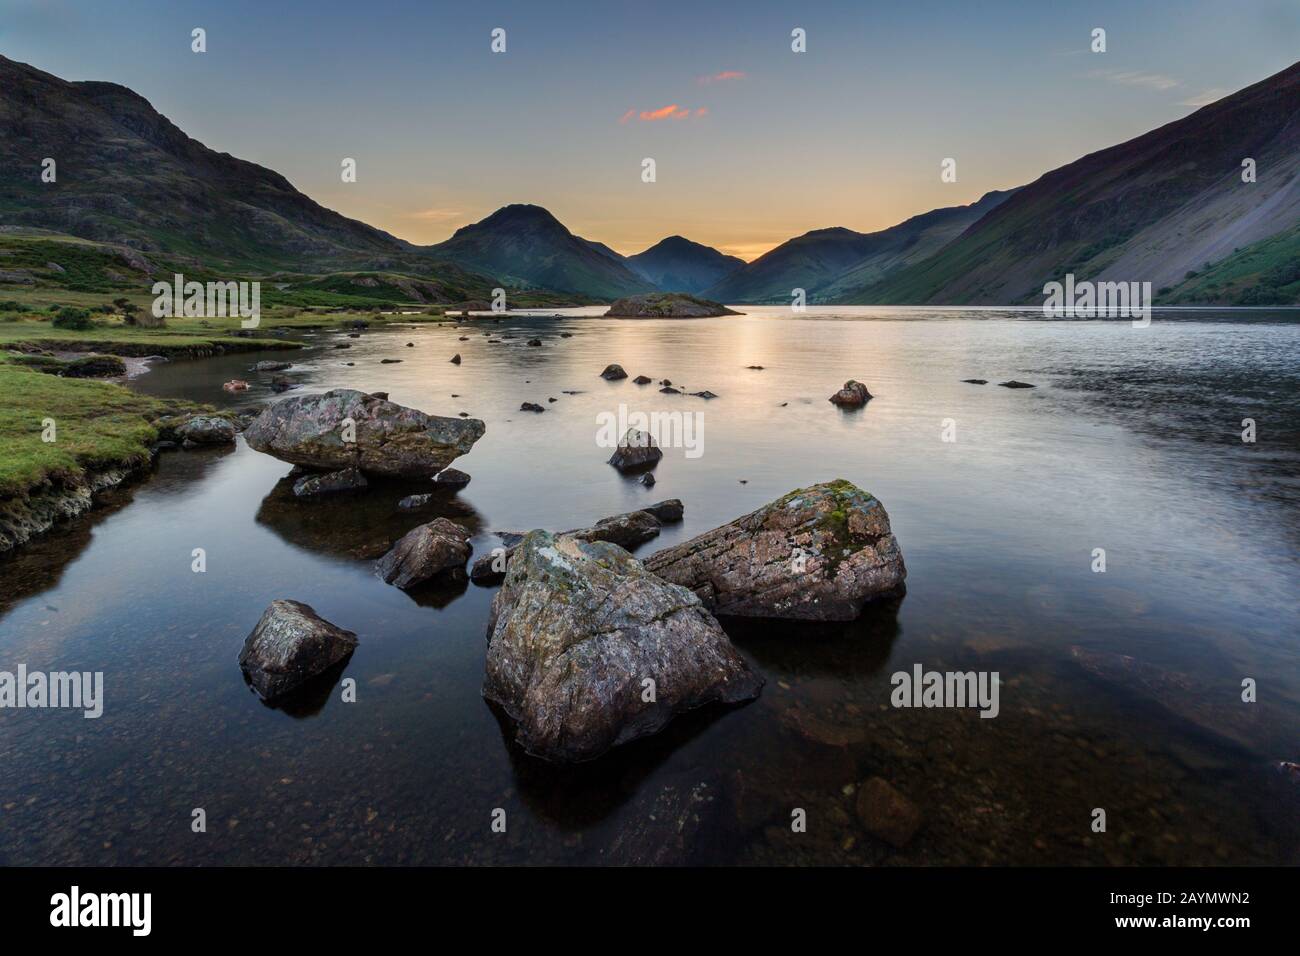 Sunrise at Wastwater looking towards Yewbarrow, Great Gable and Scafell, with rocks in the water, Lake District National Park, Cumbria, England, Uk Stock Photo